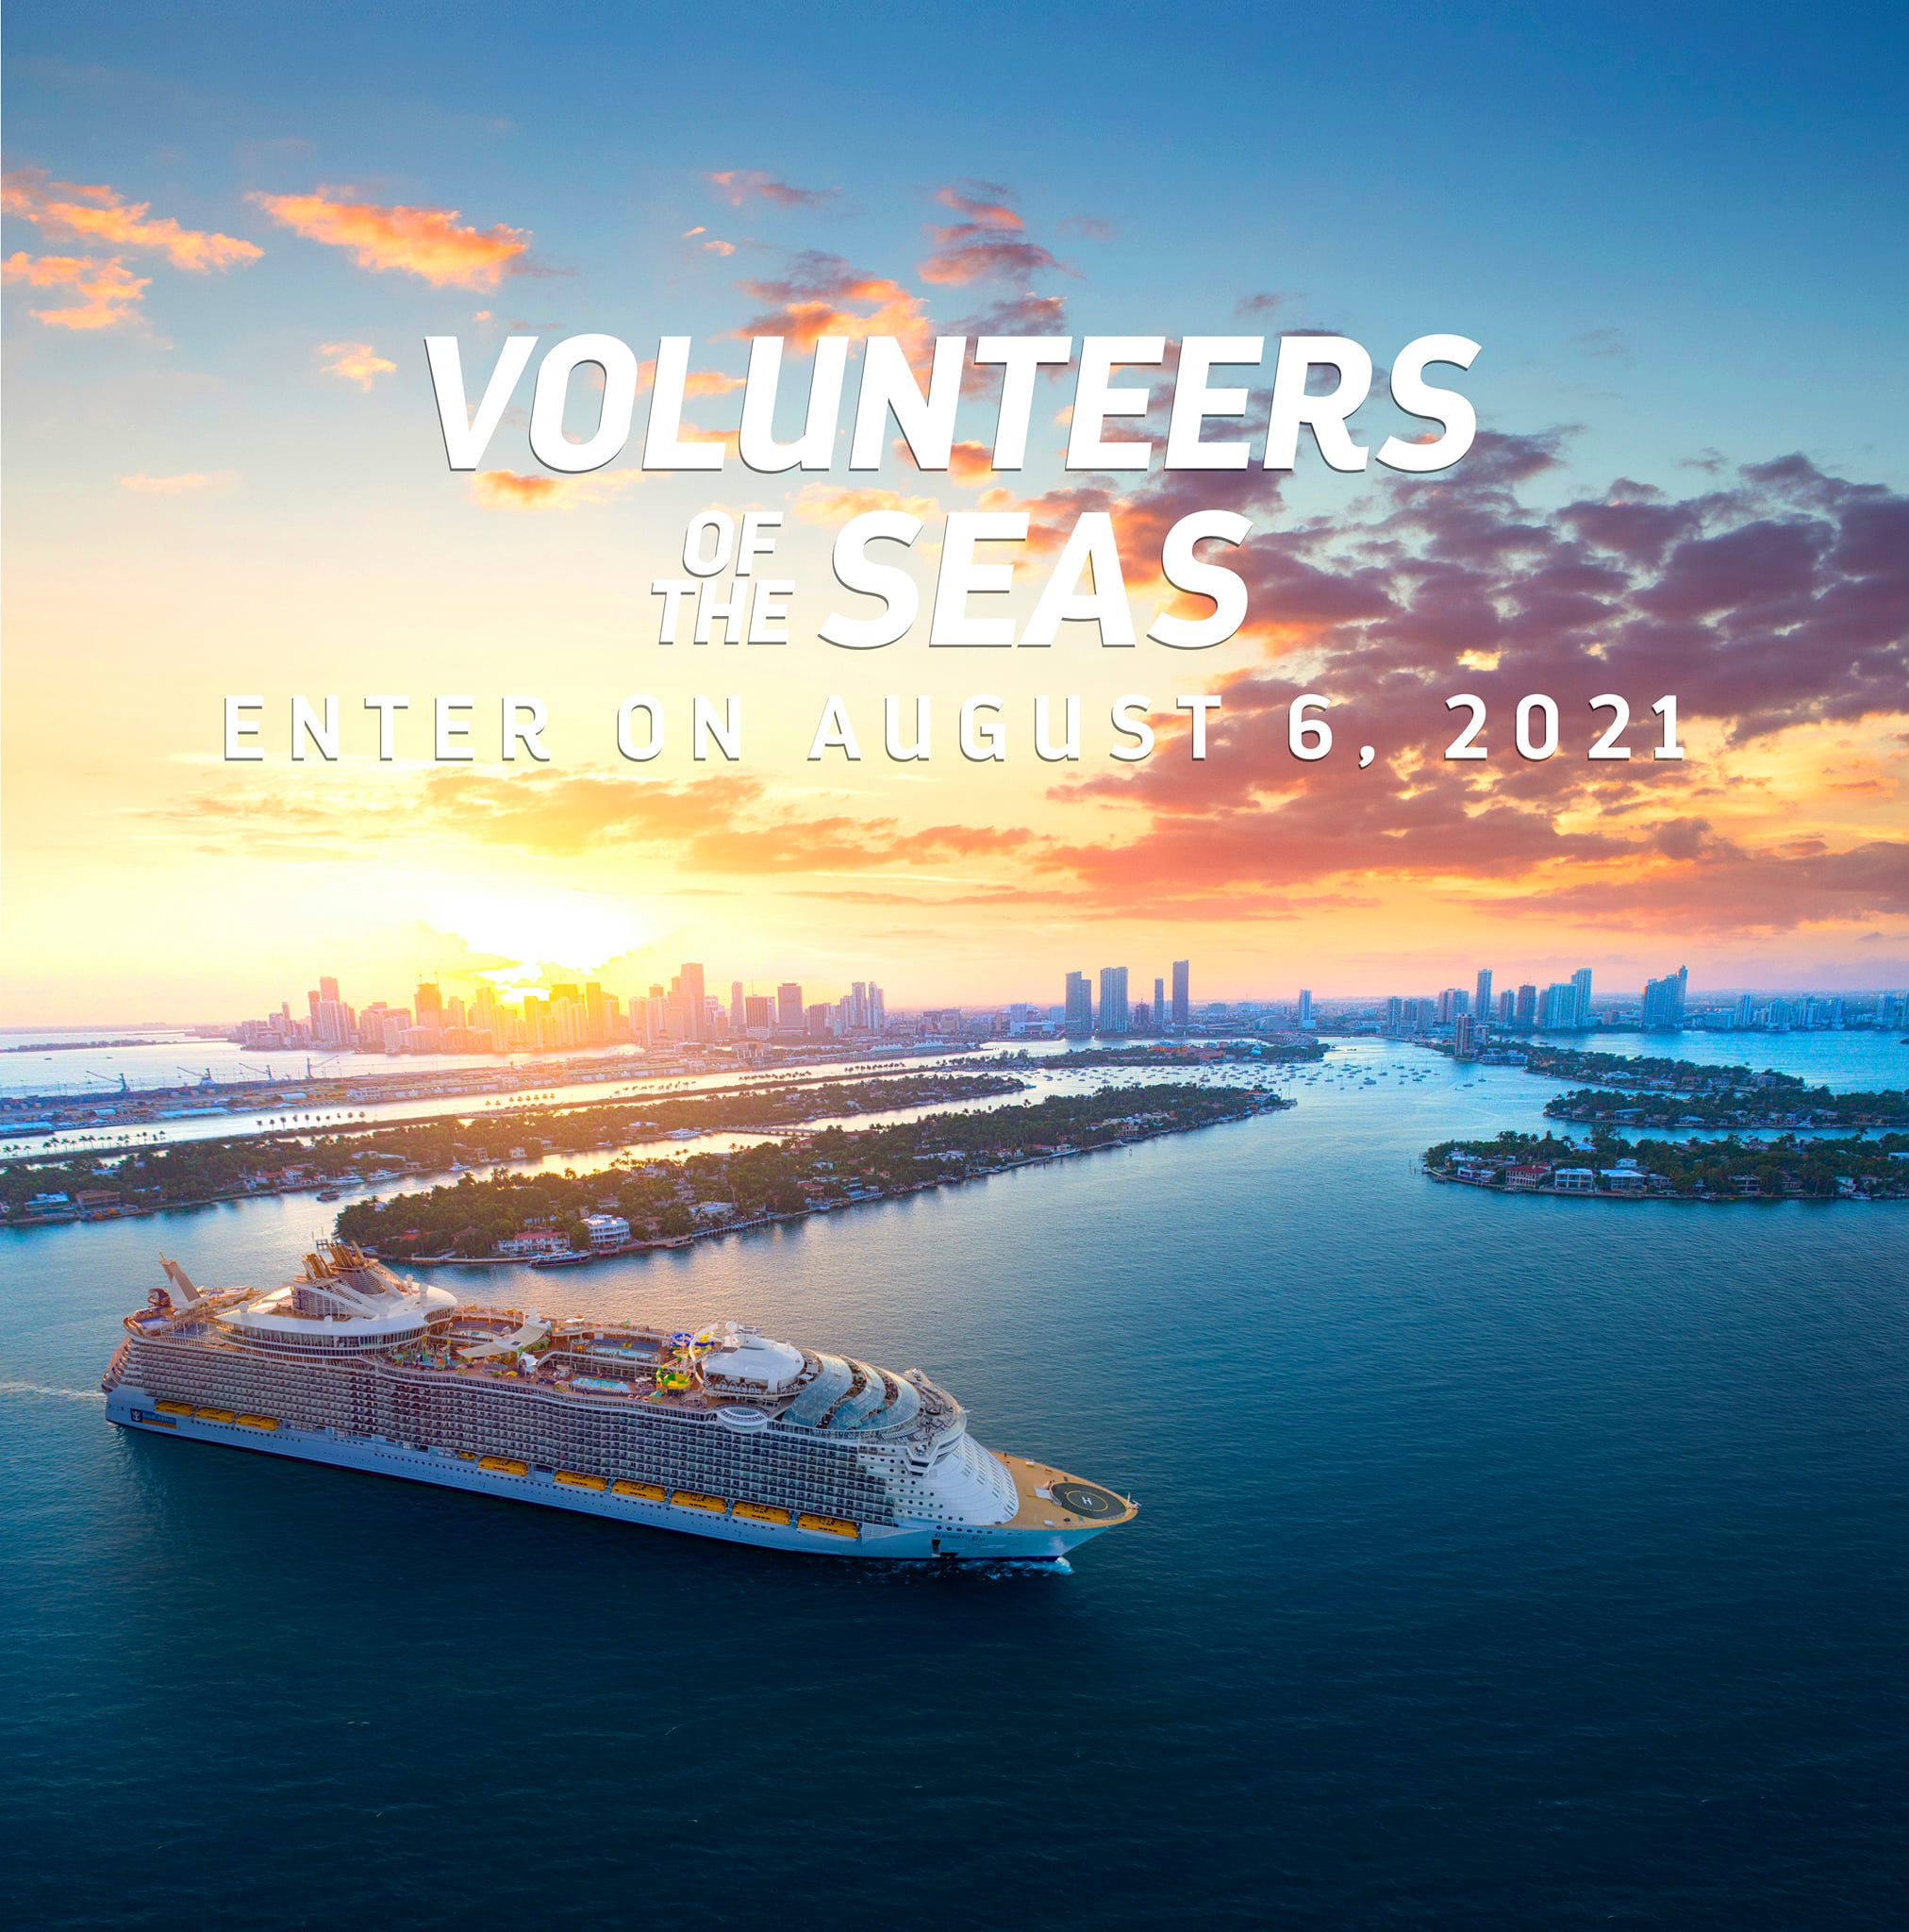 Royal Caribbean announces test cruise ship volunteers sweepstakes